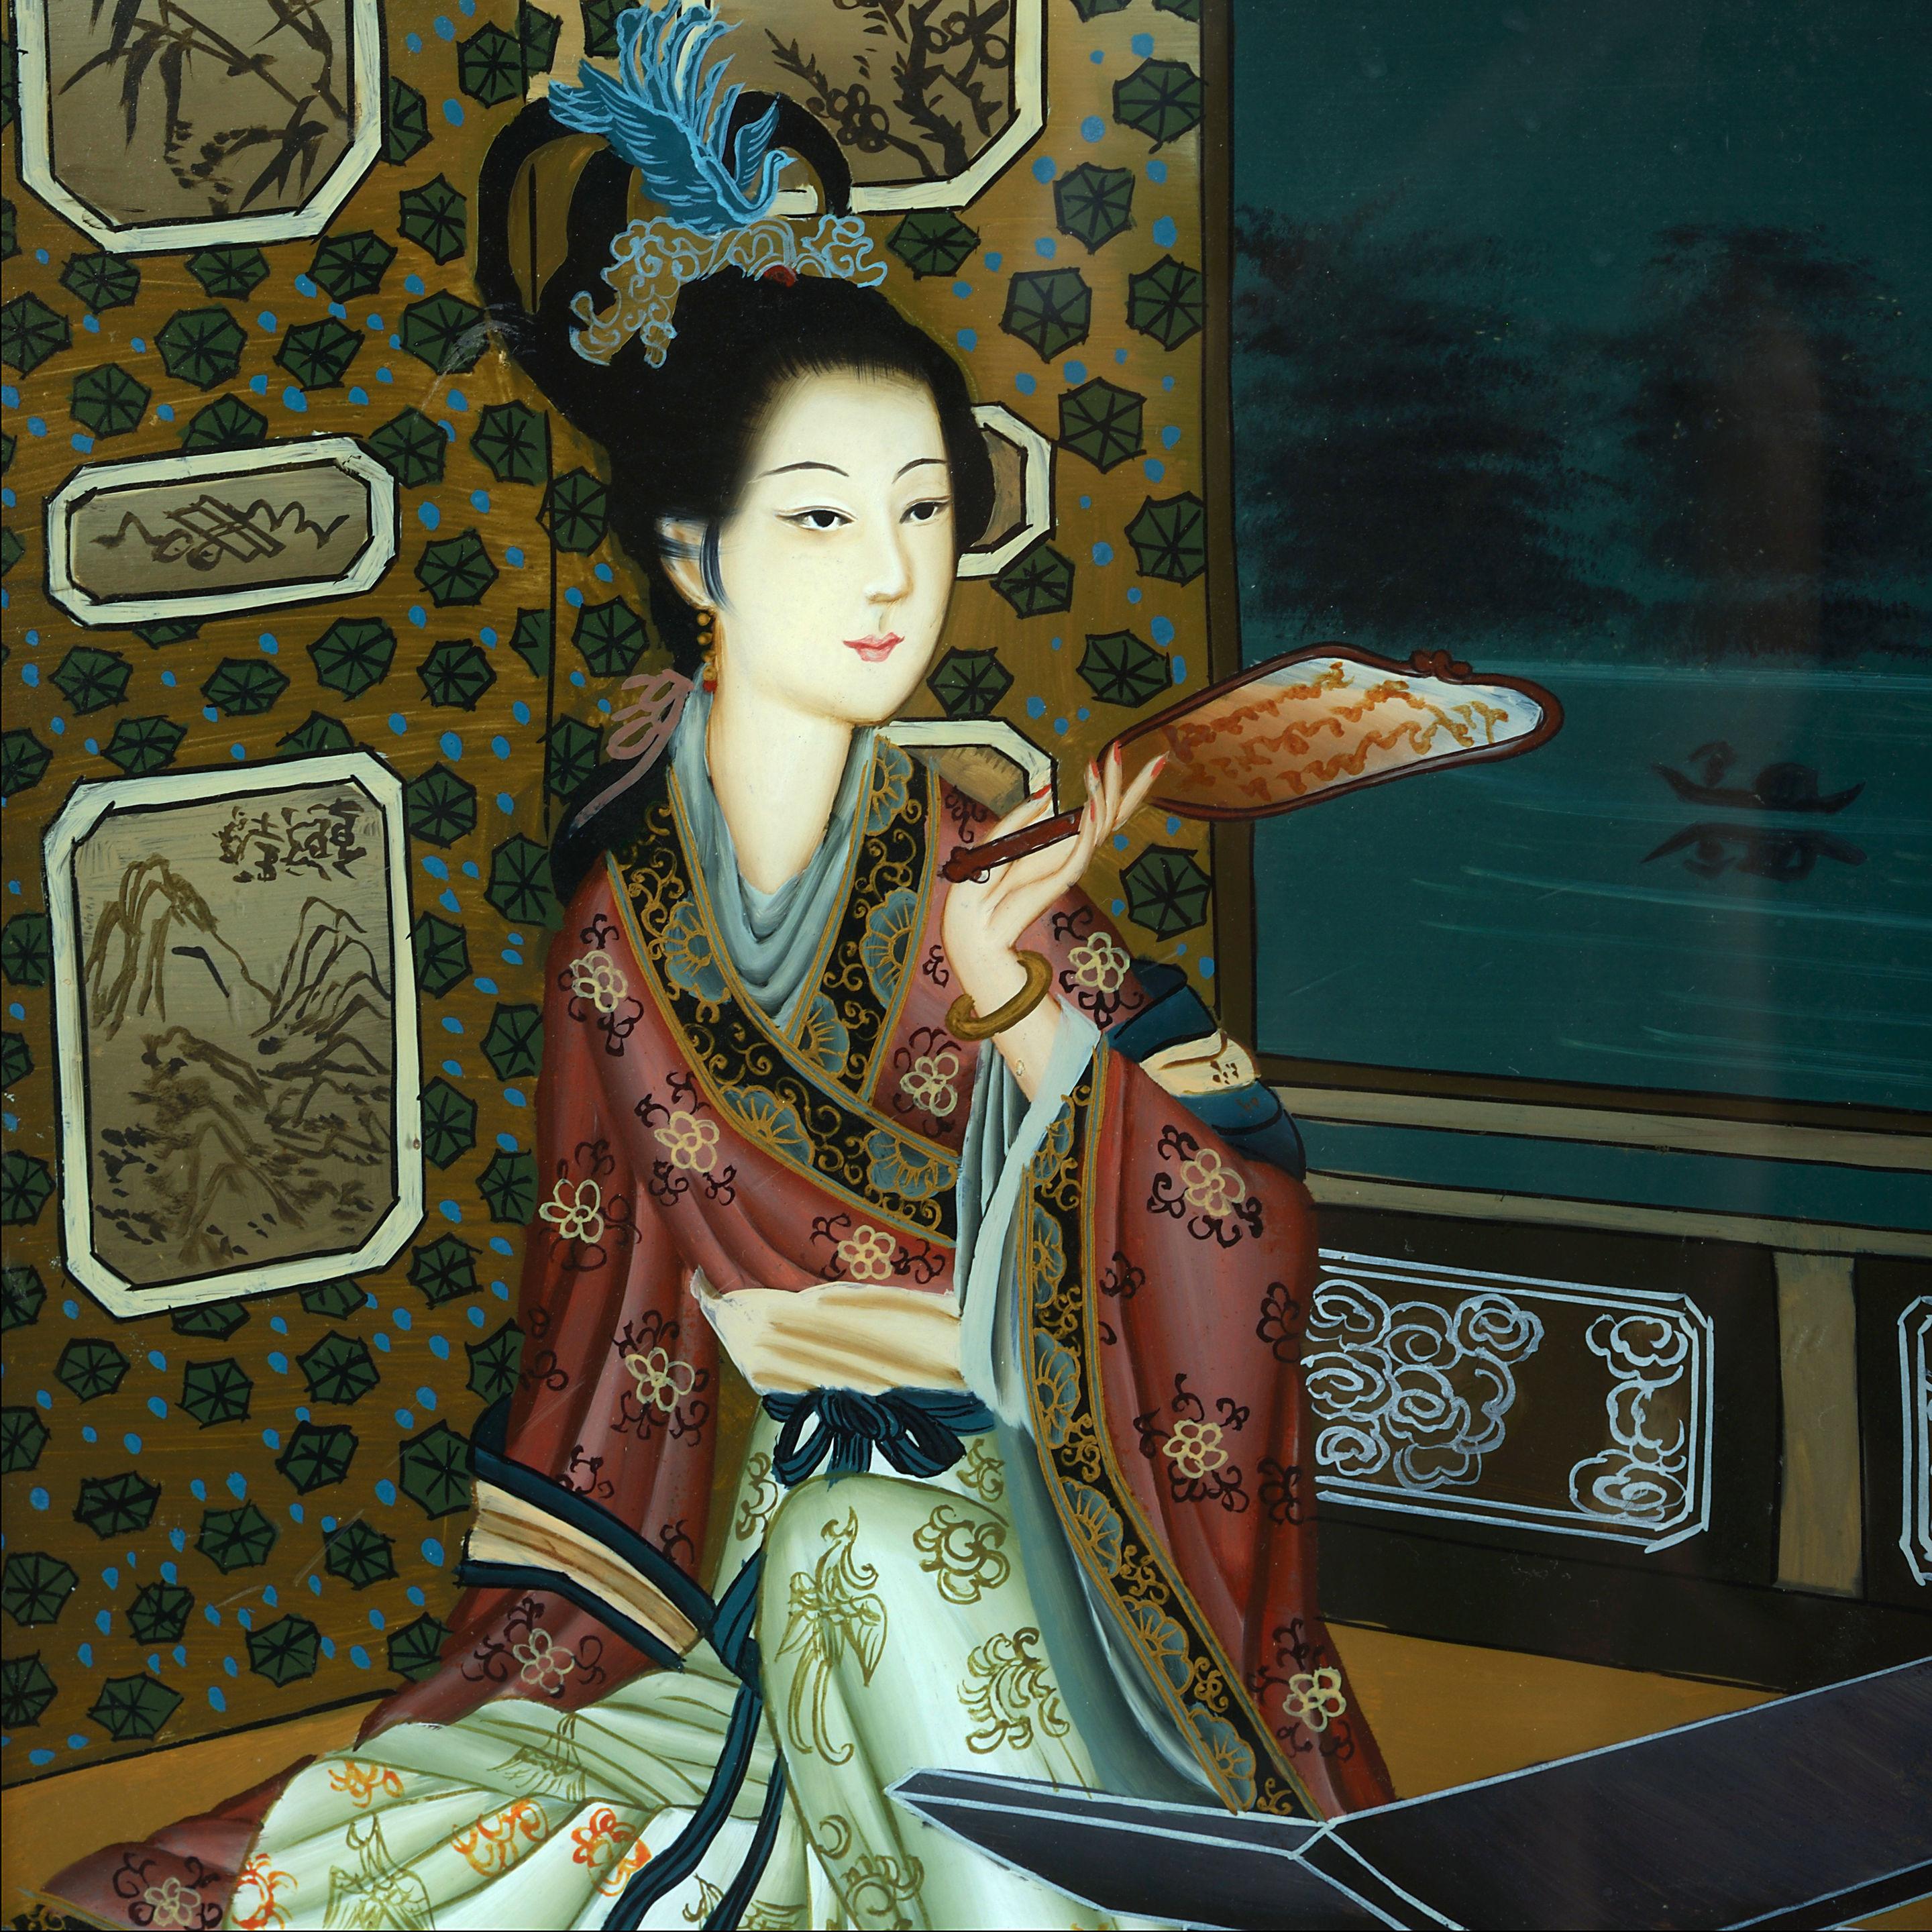 A charming late 19th century Chinese export reverse glass portrait, depicting a noblewoman within a room setting, before a screen by a table, contemplatively seated with her fan in front of an open window. 

Held within a period ebonized frame.